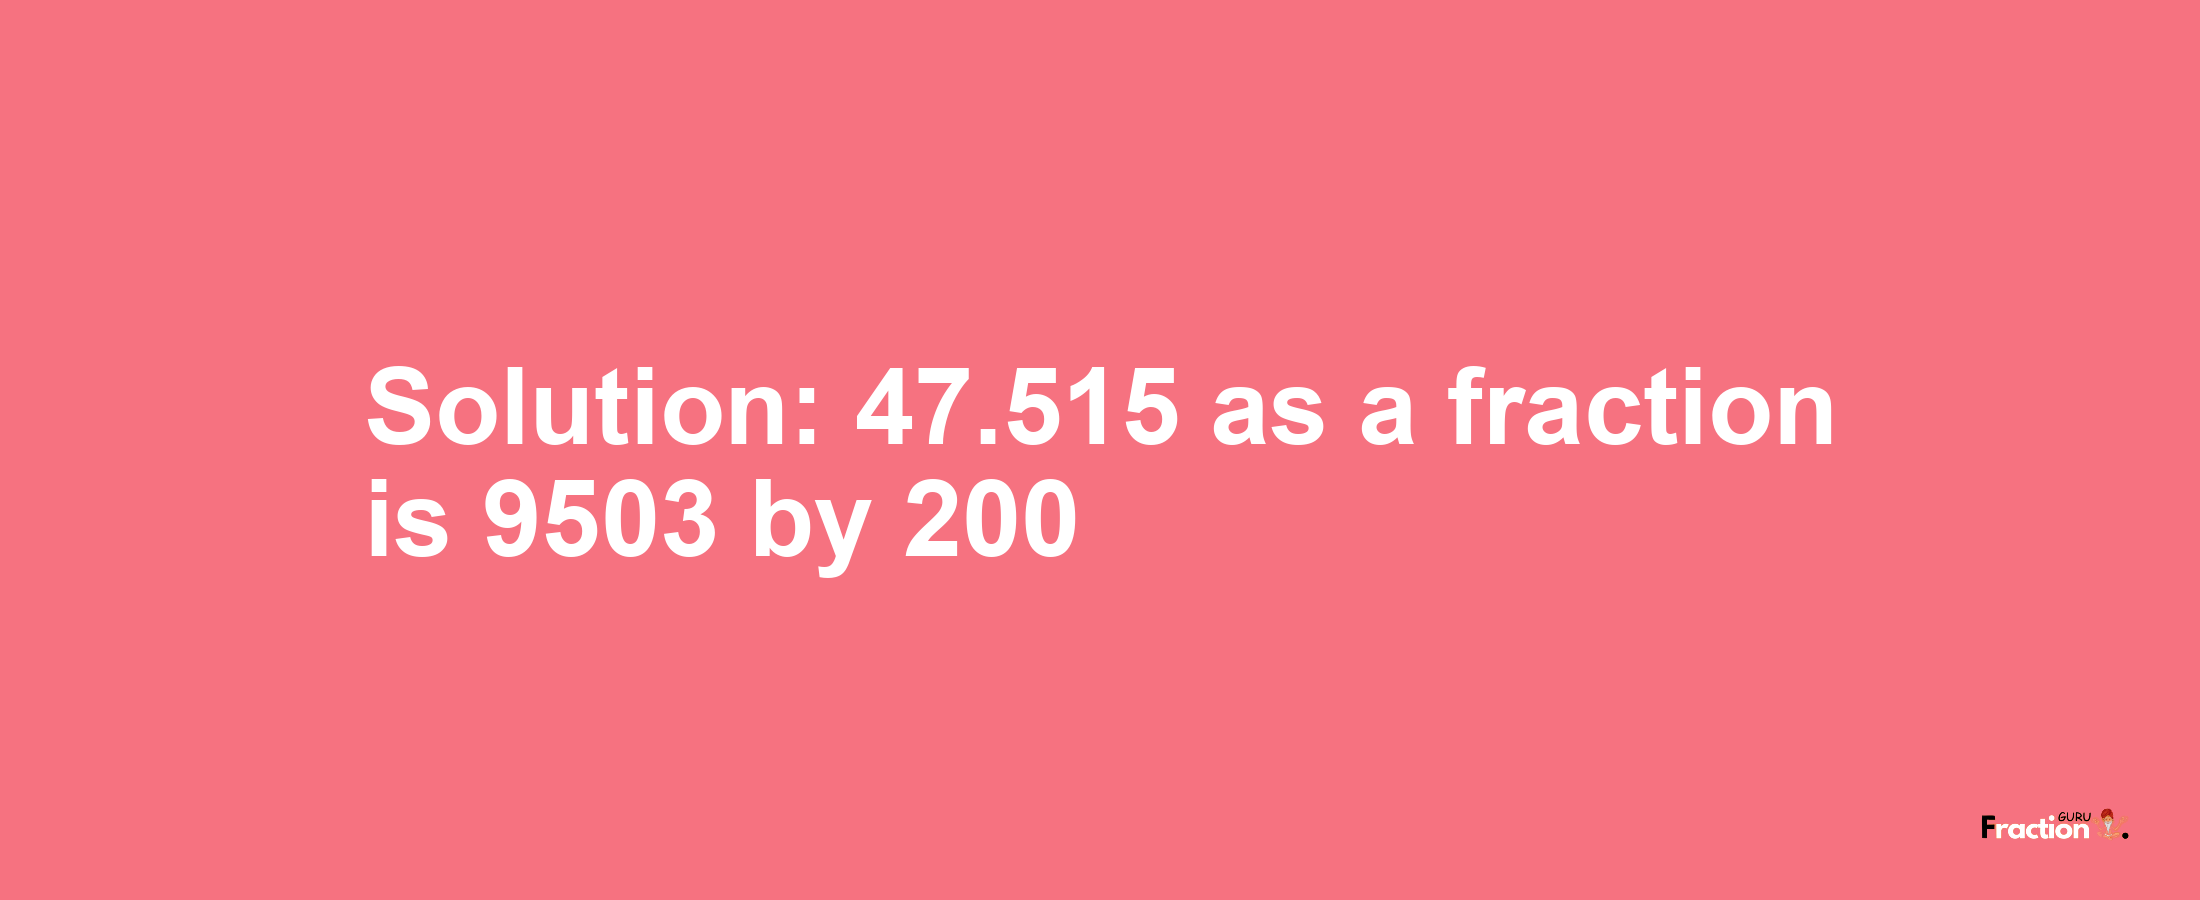 Solution:47.515 as a fraction is 9503/200